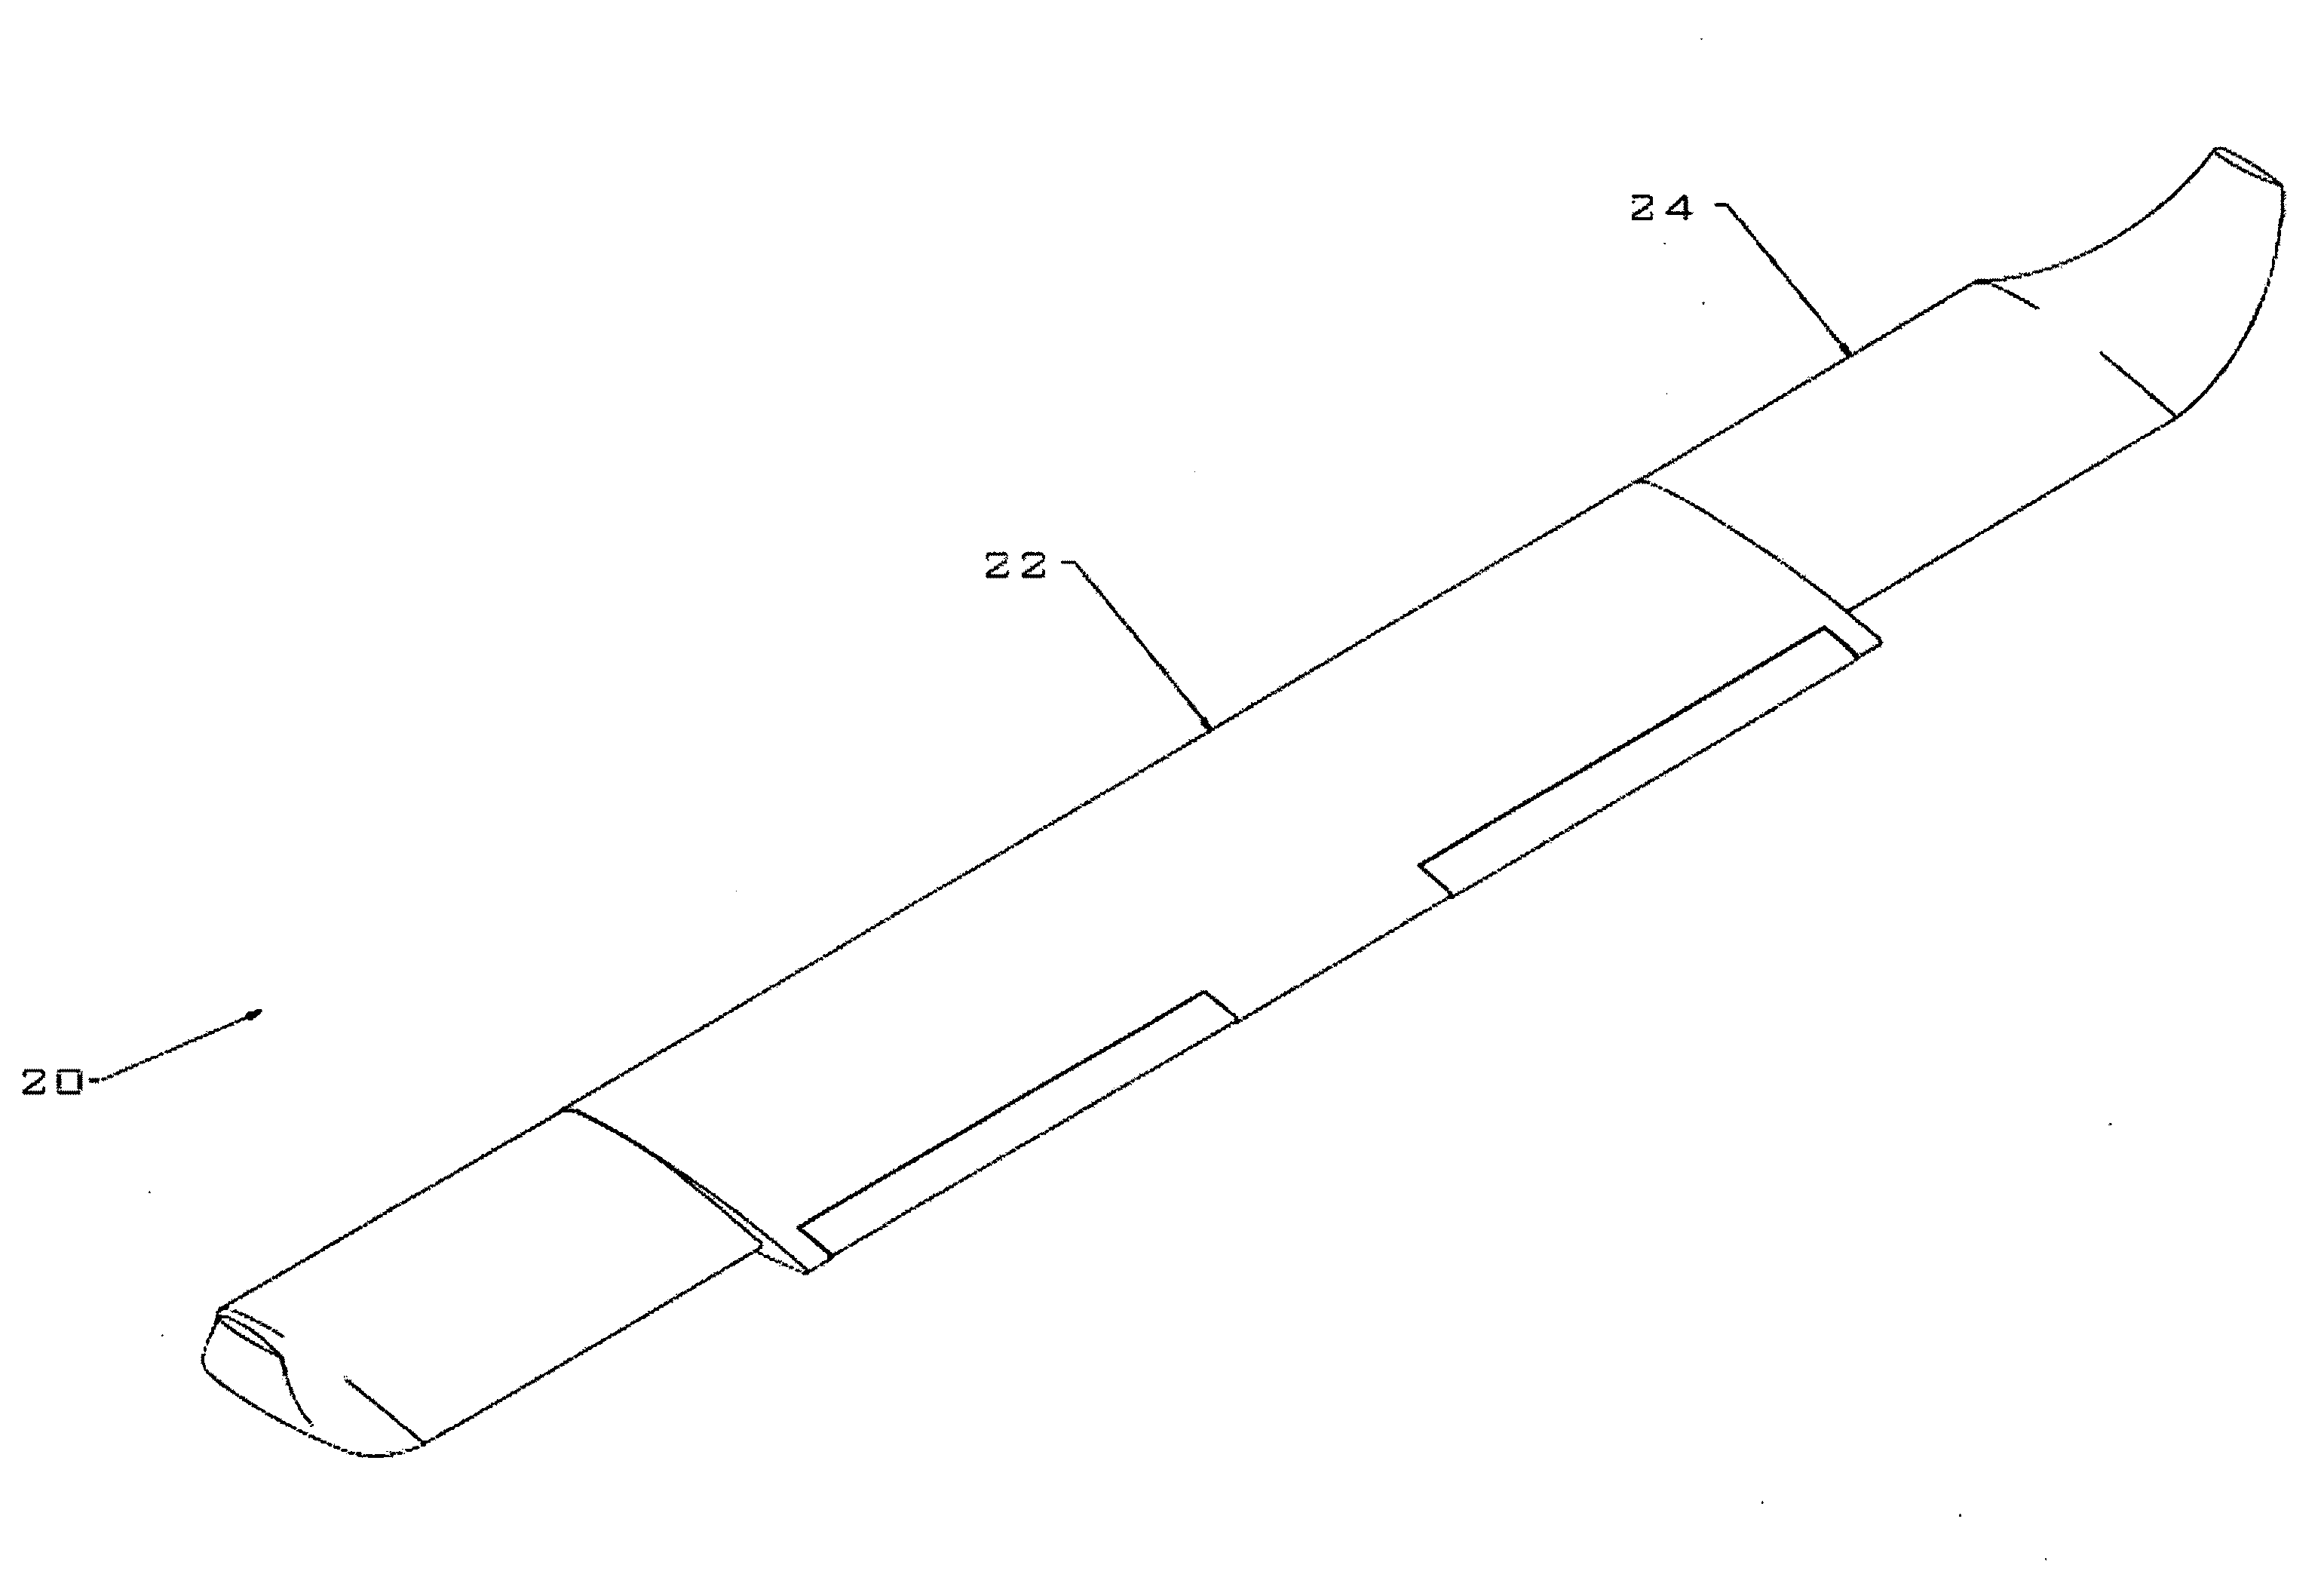 Telescoping and sweeping wing that is reconfigurable during flight